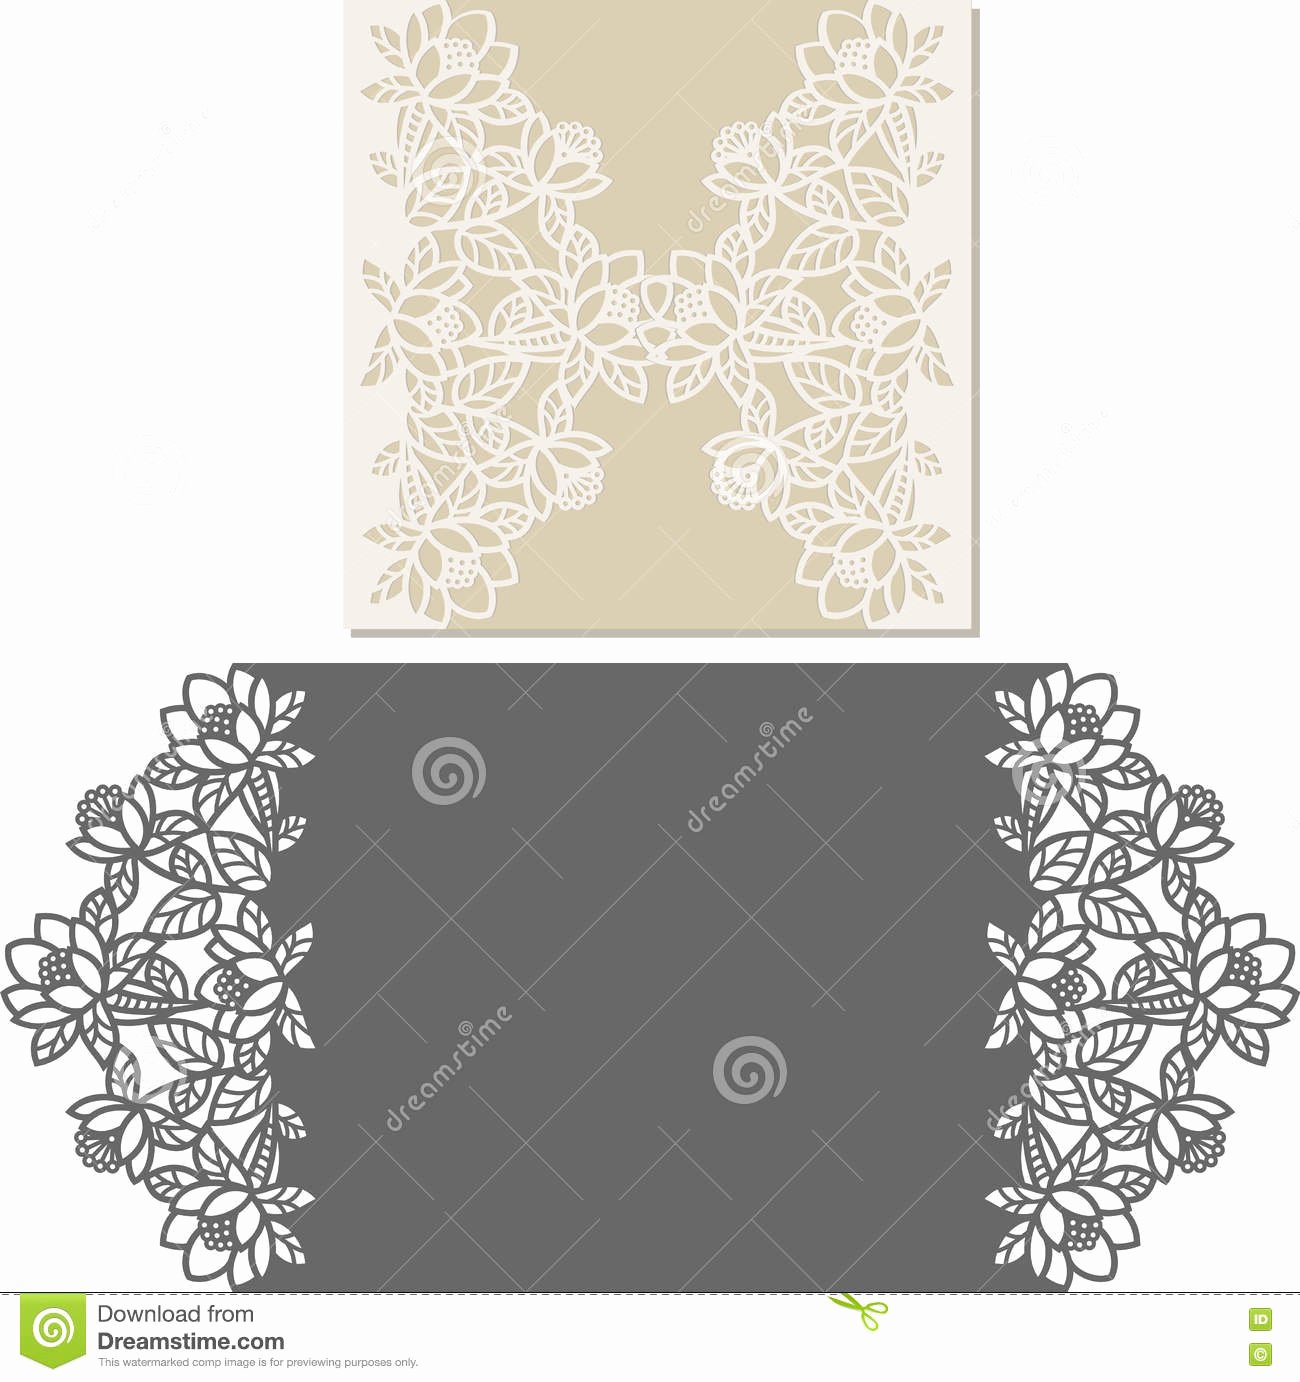 Bridesmaid Card Template Lovely Envelope Cartoons Illustrations &amp; Vector Stock